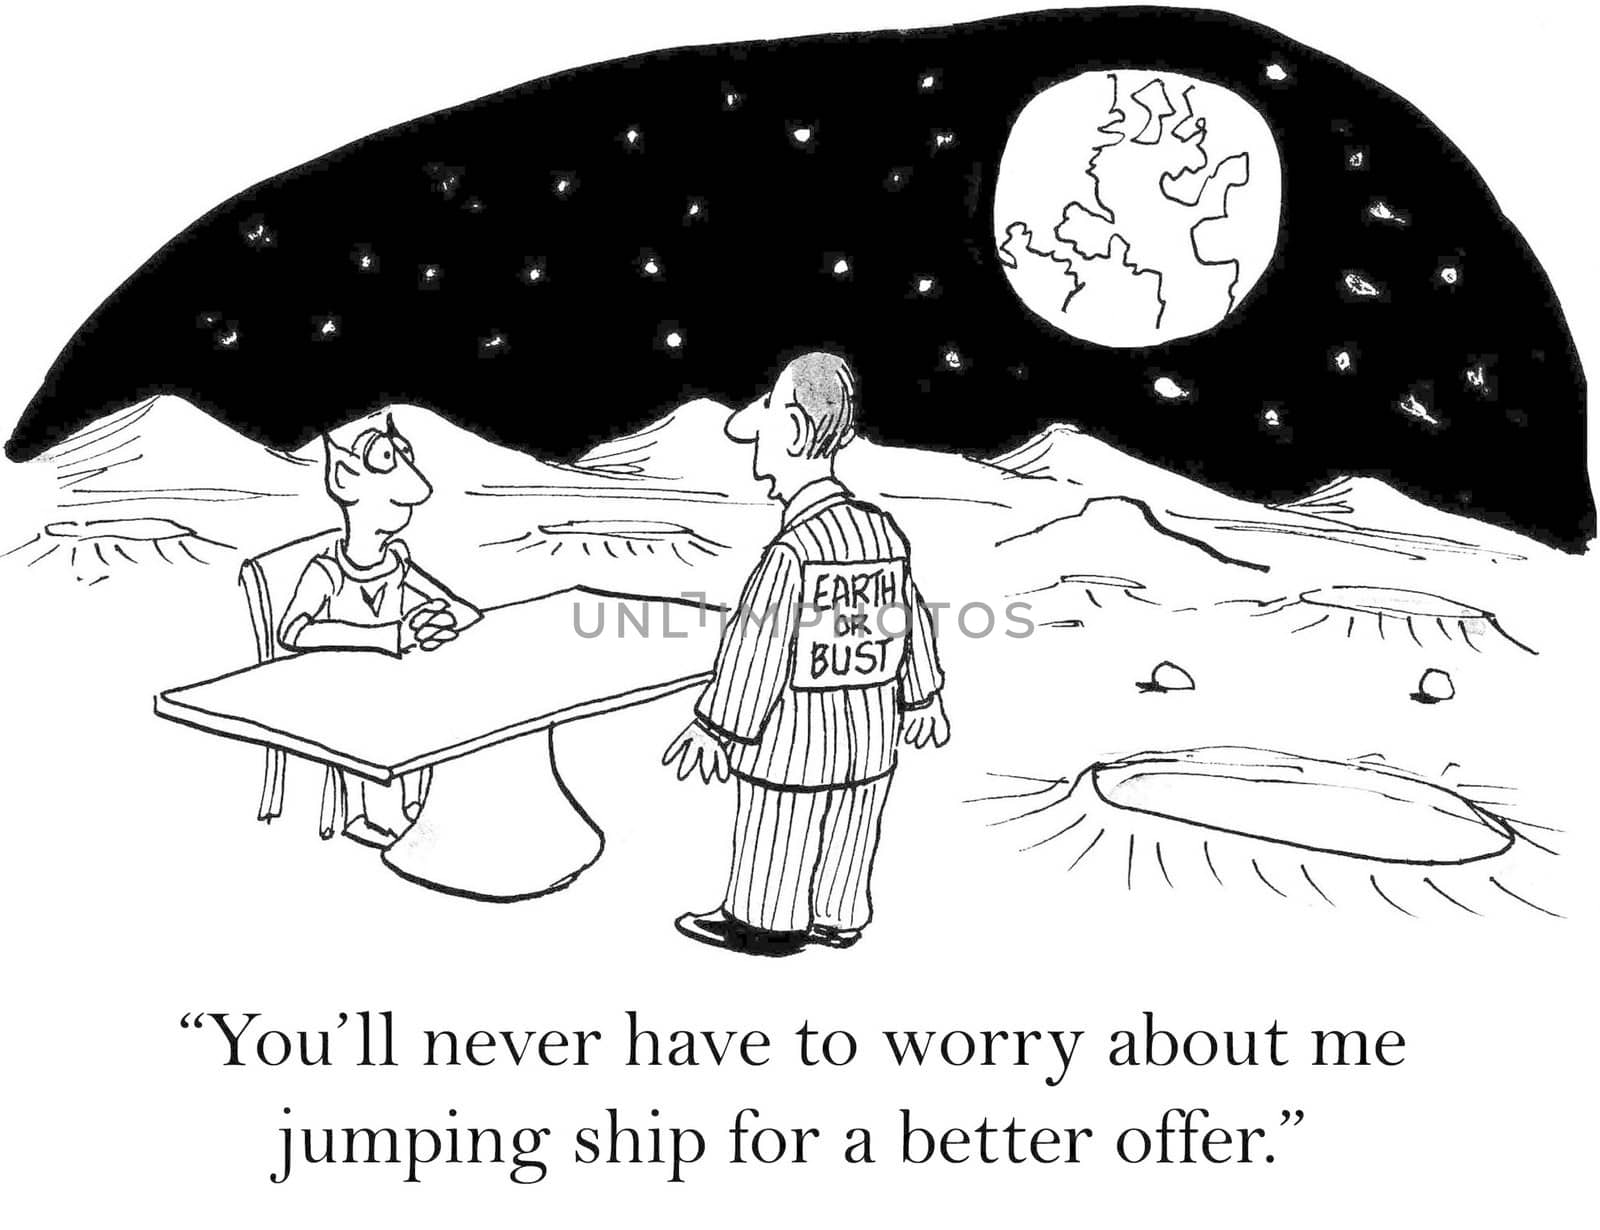 "You'll never have to worry about me jumping ship for a better offer."  (Earth or Bust)